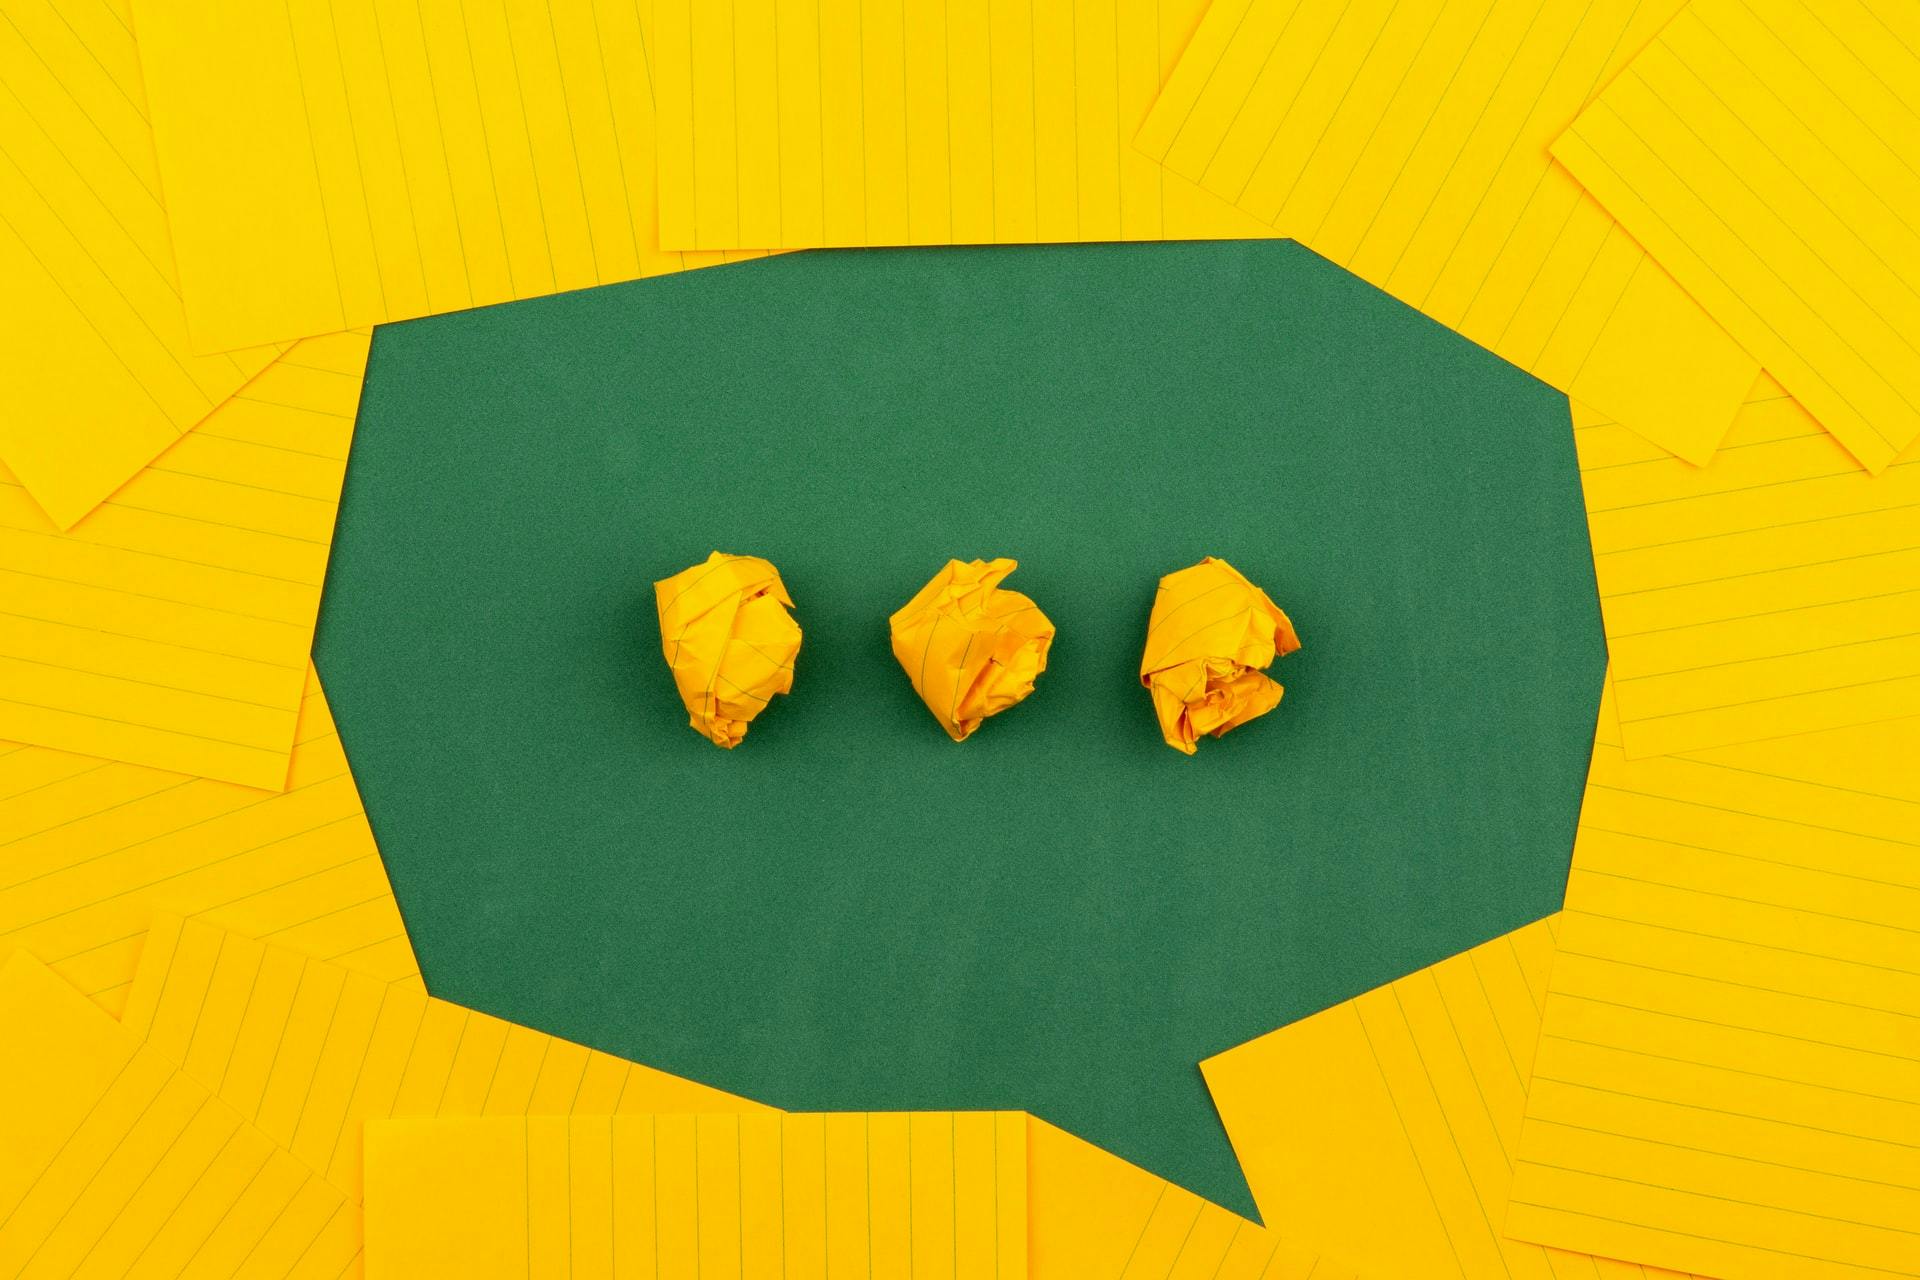 A speech bubble and out of yellow lined paper arranged on a green wall. Three crumpled up balls of yellow paper form three dots inside the speech bubble.